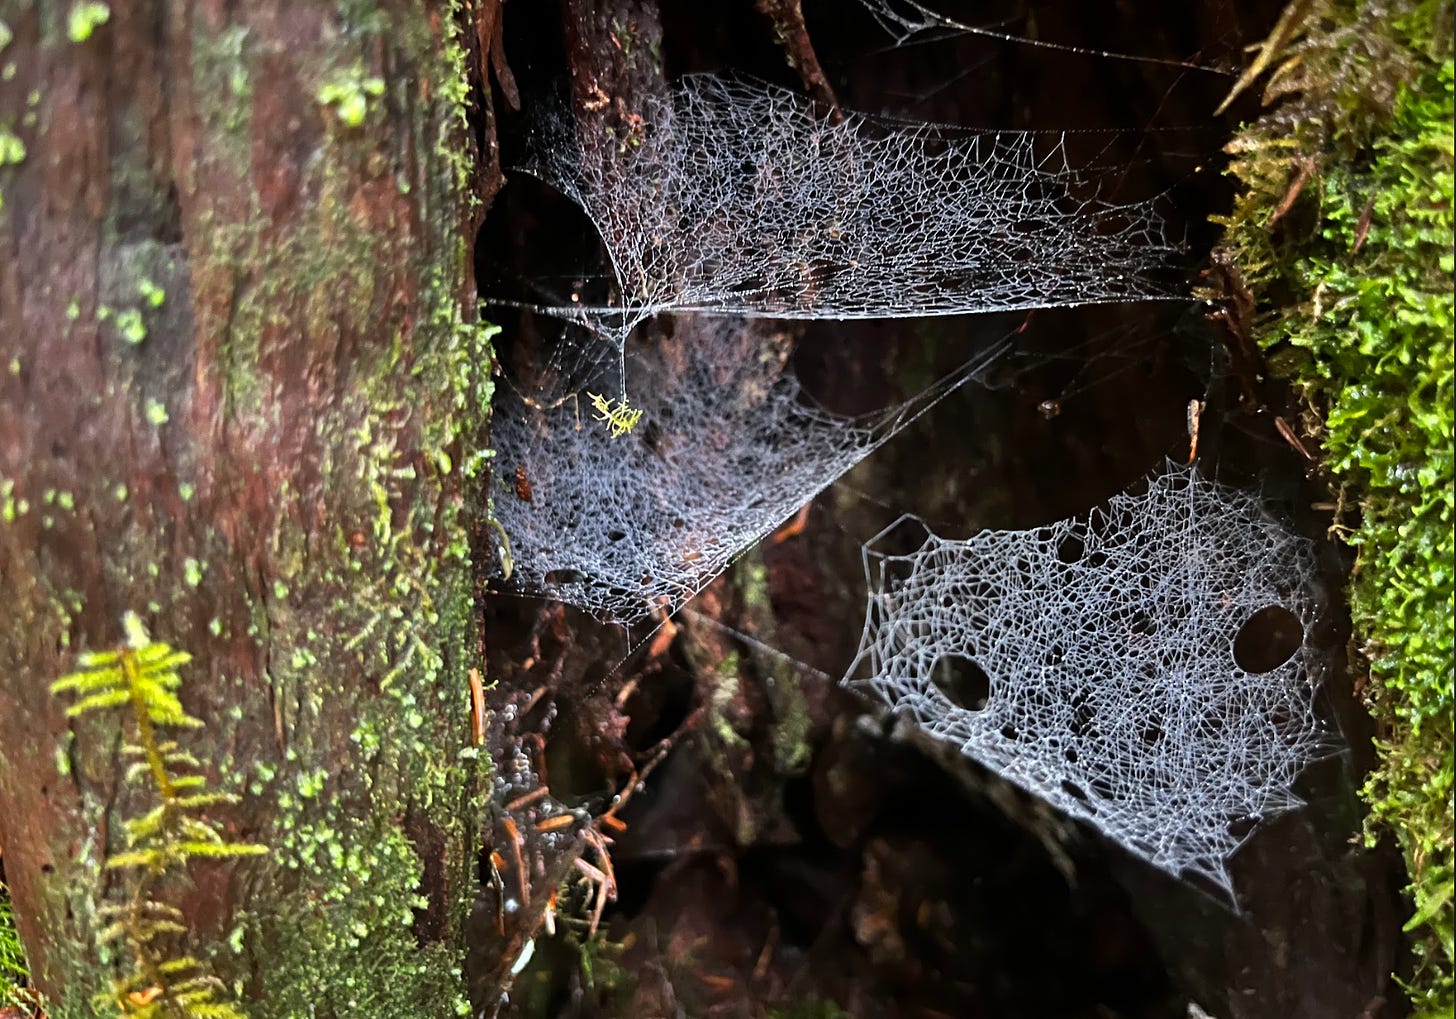 Dewy spider webs in a hollow log.